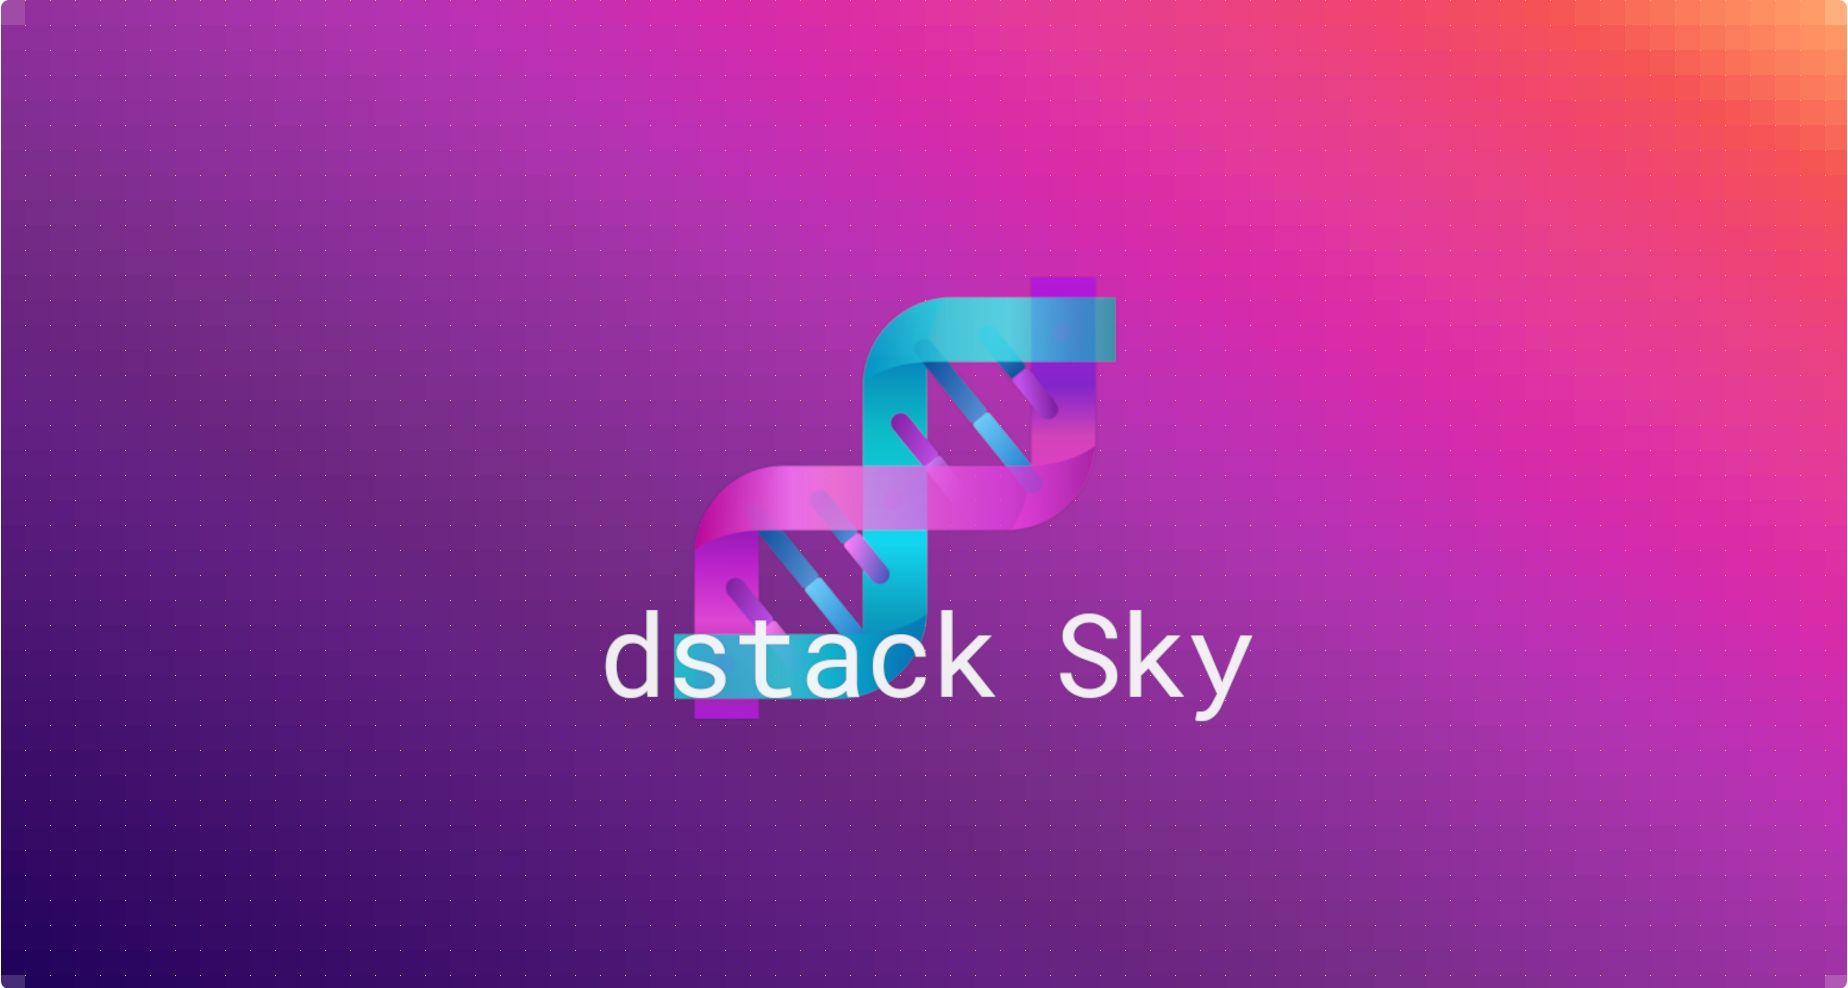 The dstack Sky service connects users with GPUs at competitive prices